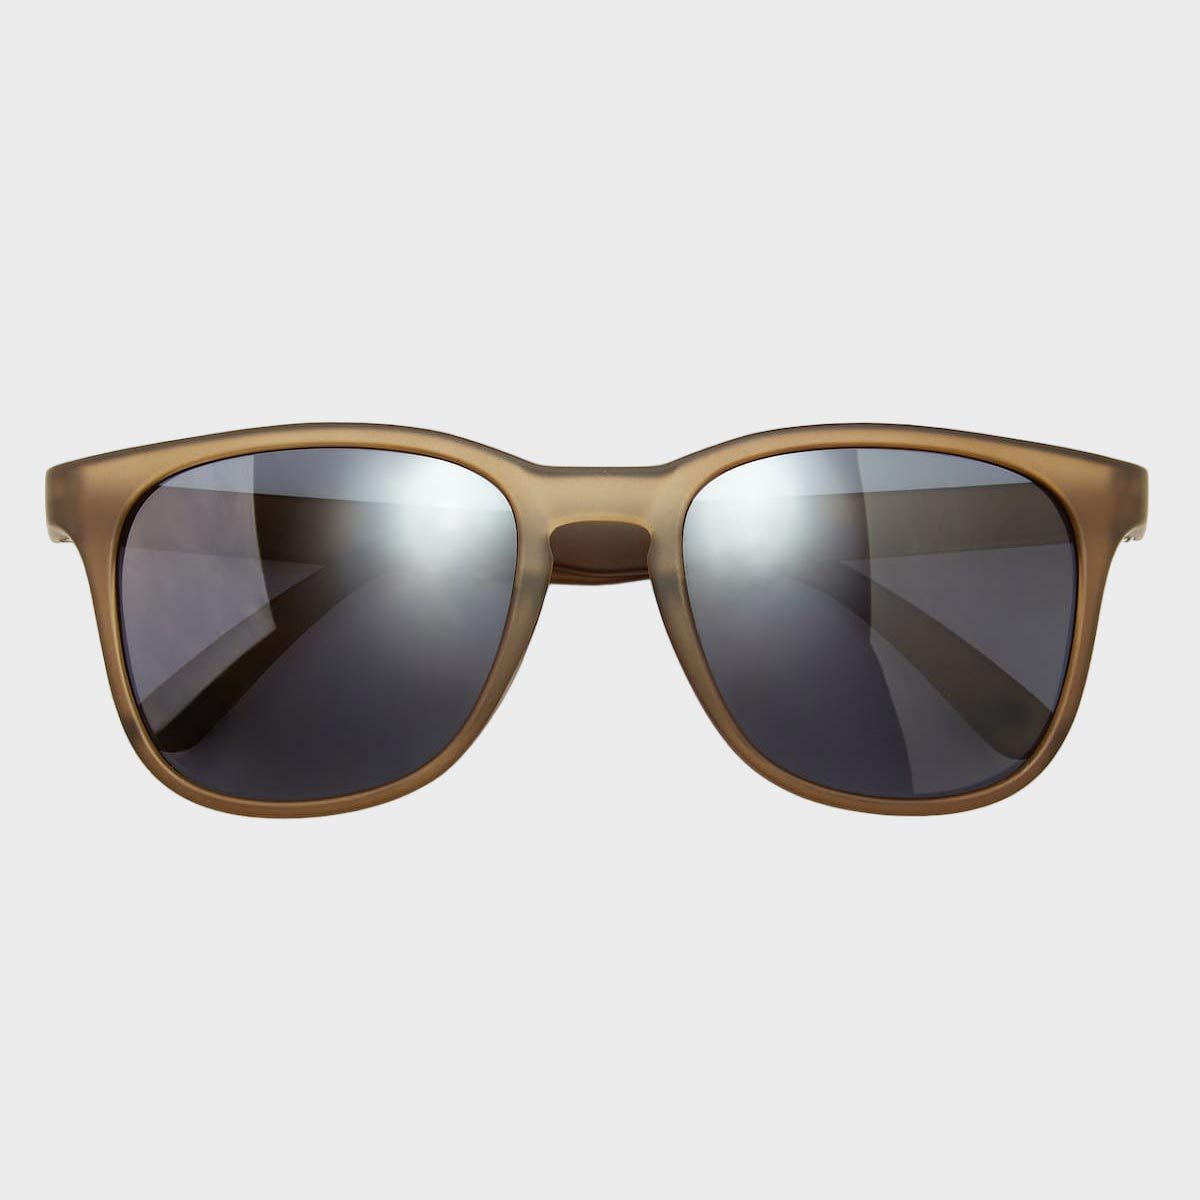 6 Best Cheap Sunglasses That Only Look Expensive